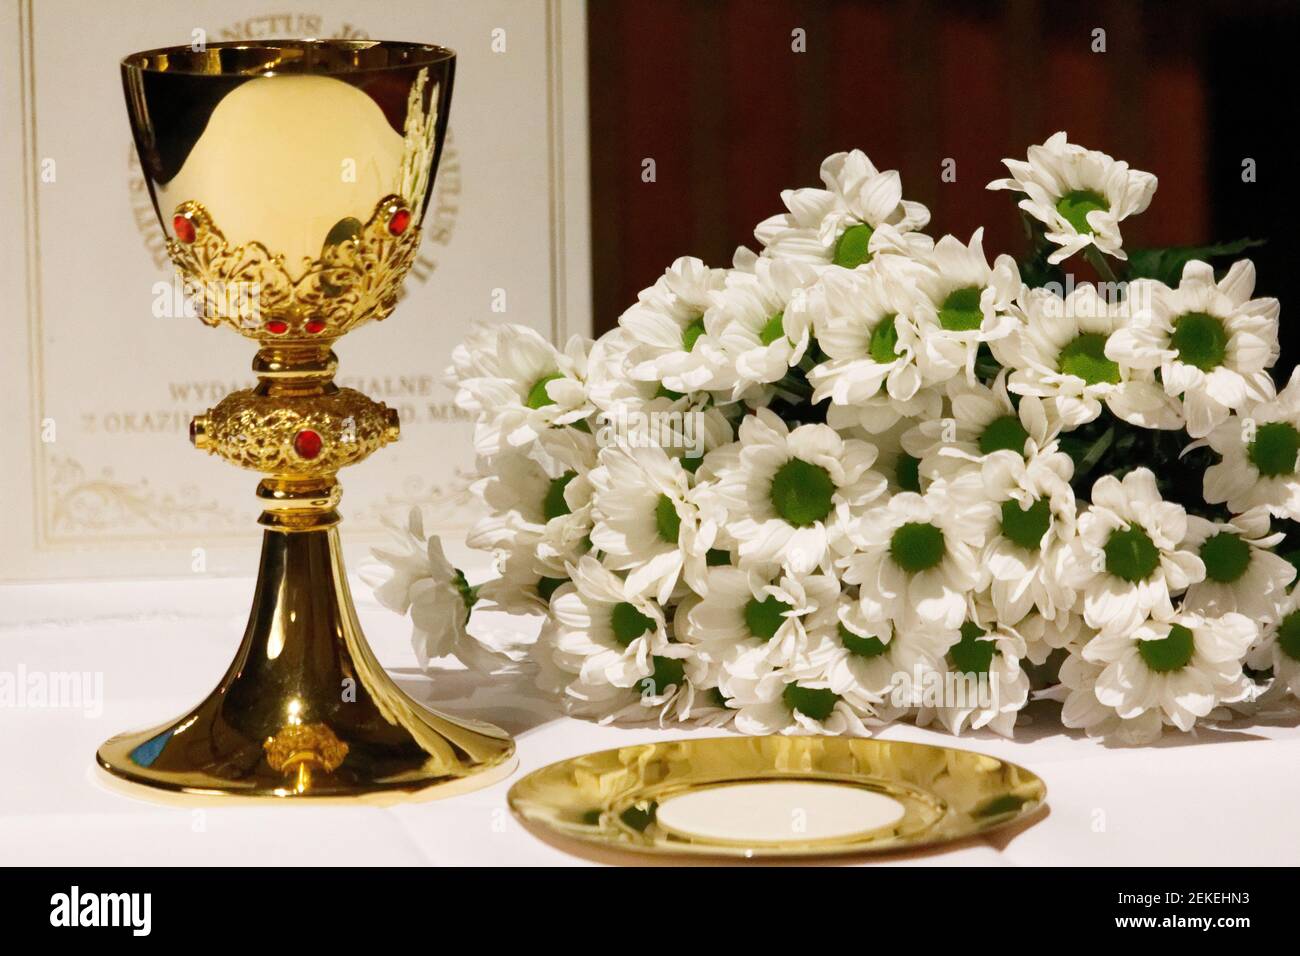 A Golden Chalice With White Flowers And Bible Religion Christianity